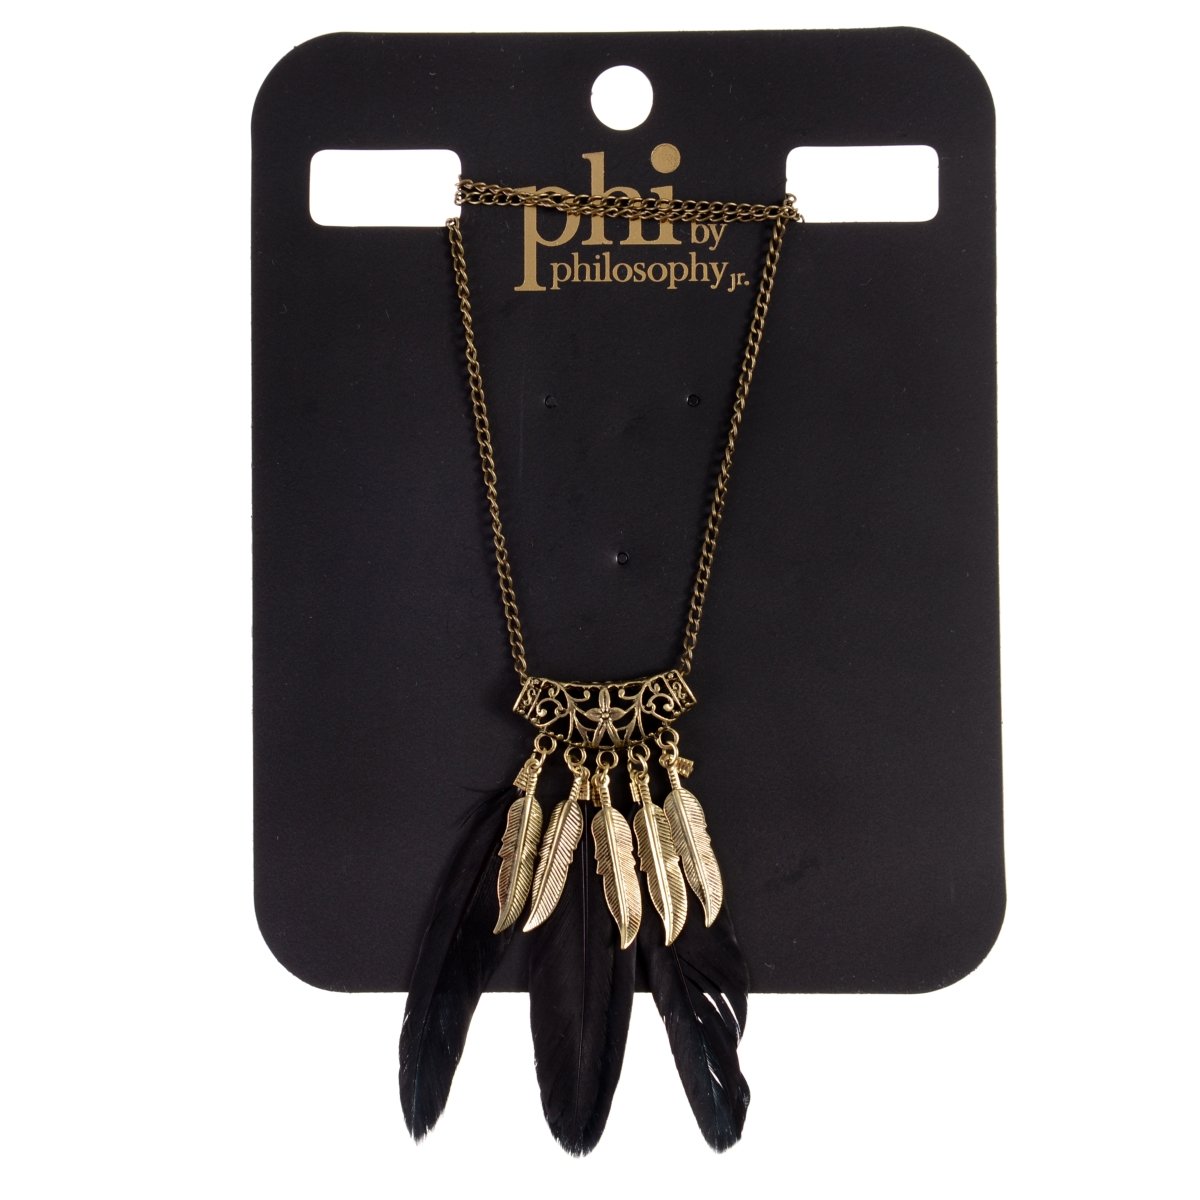 Collar Tribal Phi By Philosophy